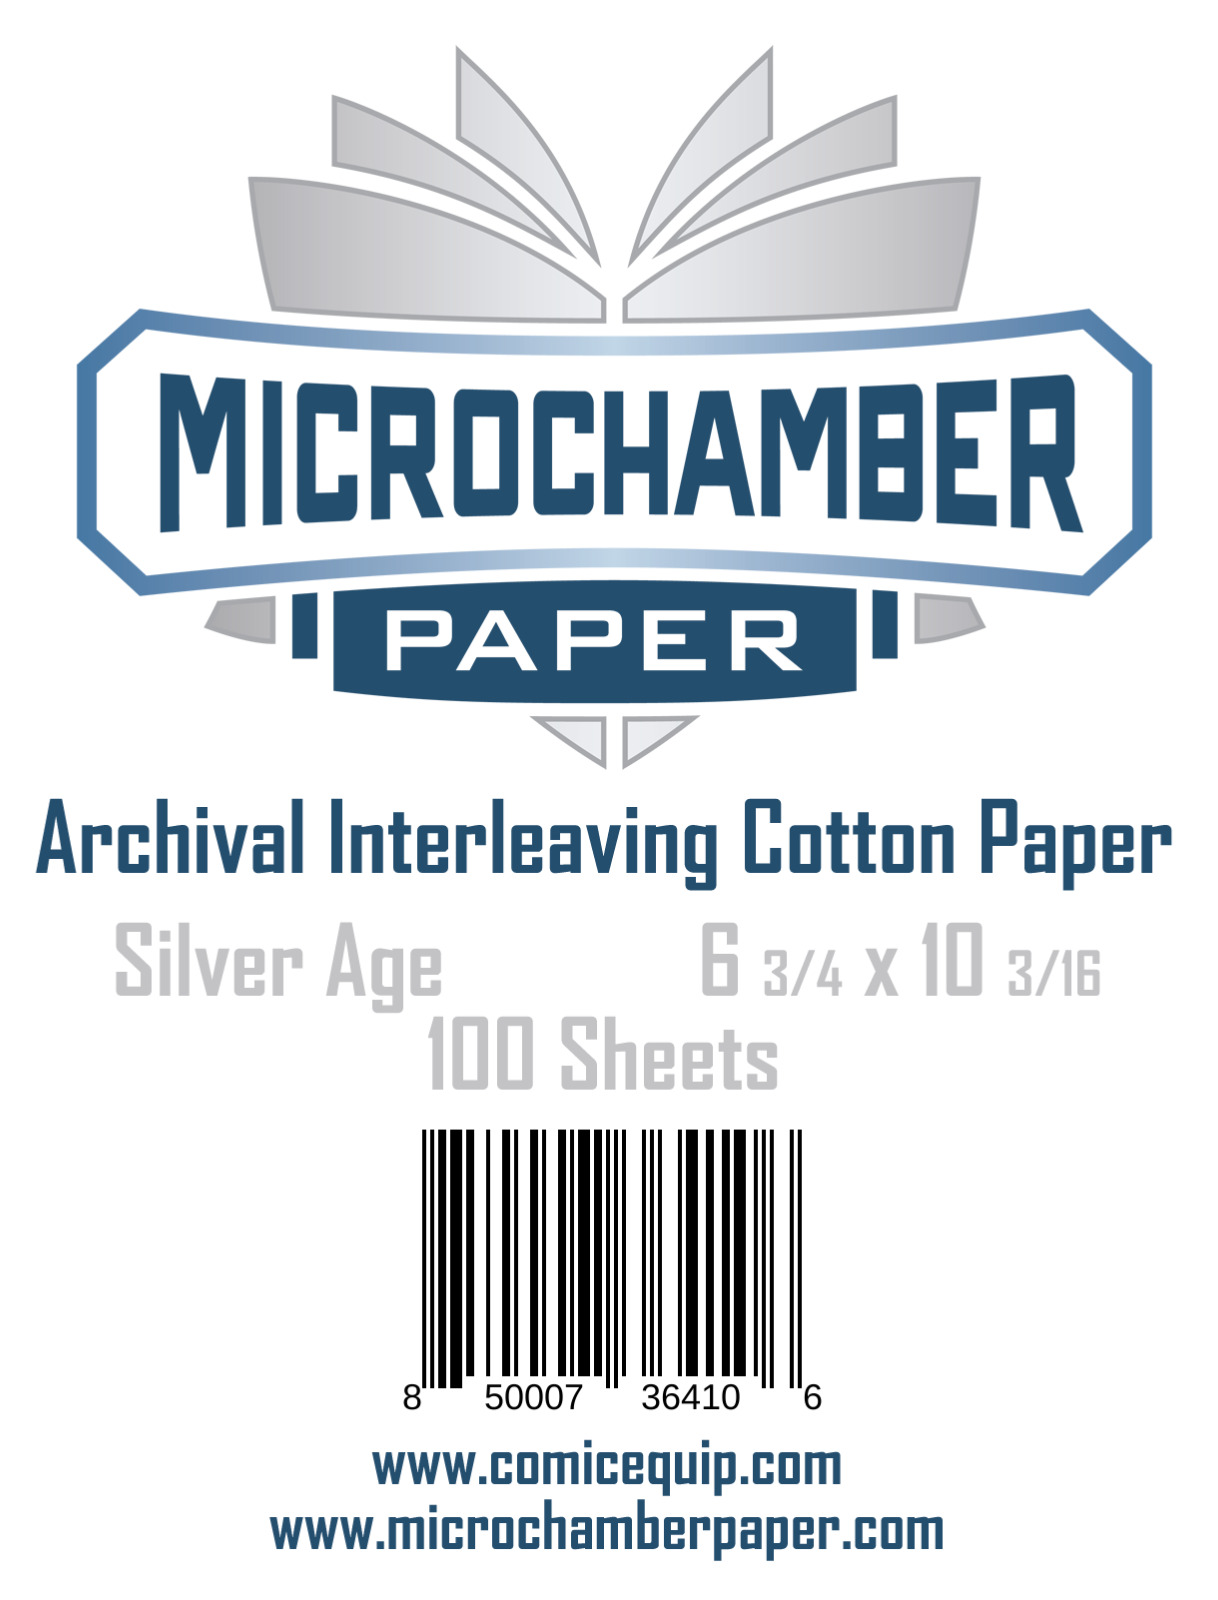 MicroChamber Paper Silver Size 100 Sheets 6-3/4